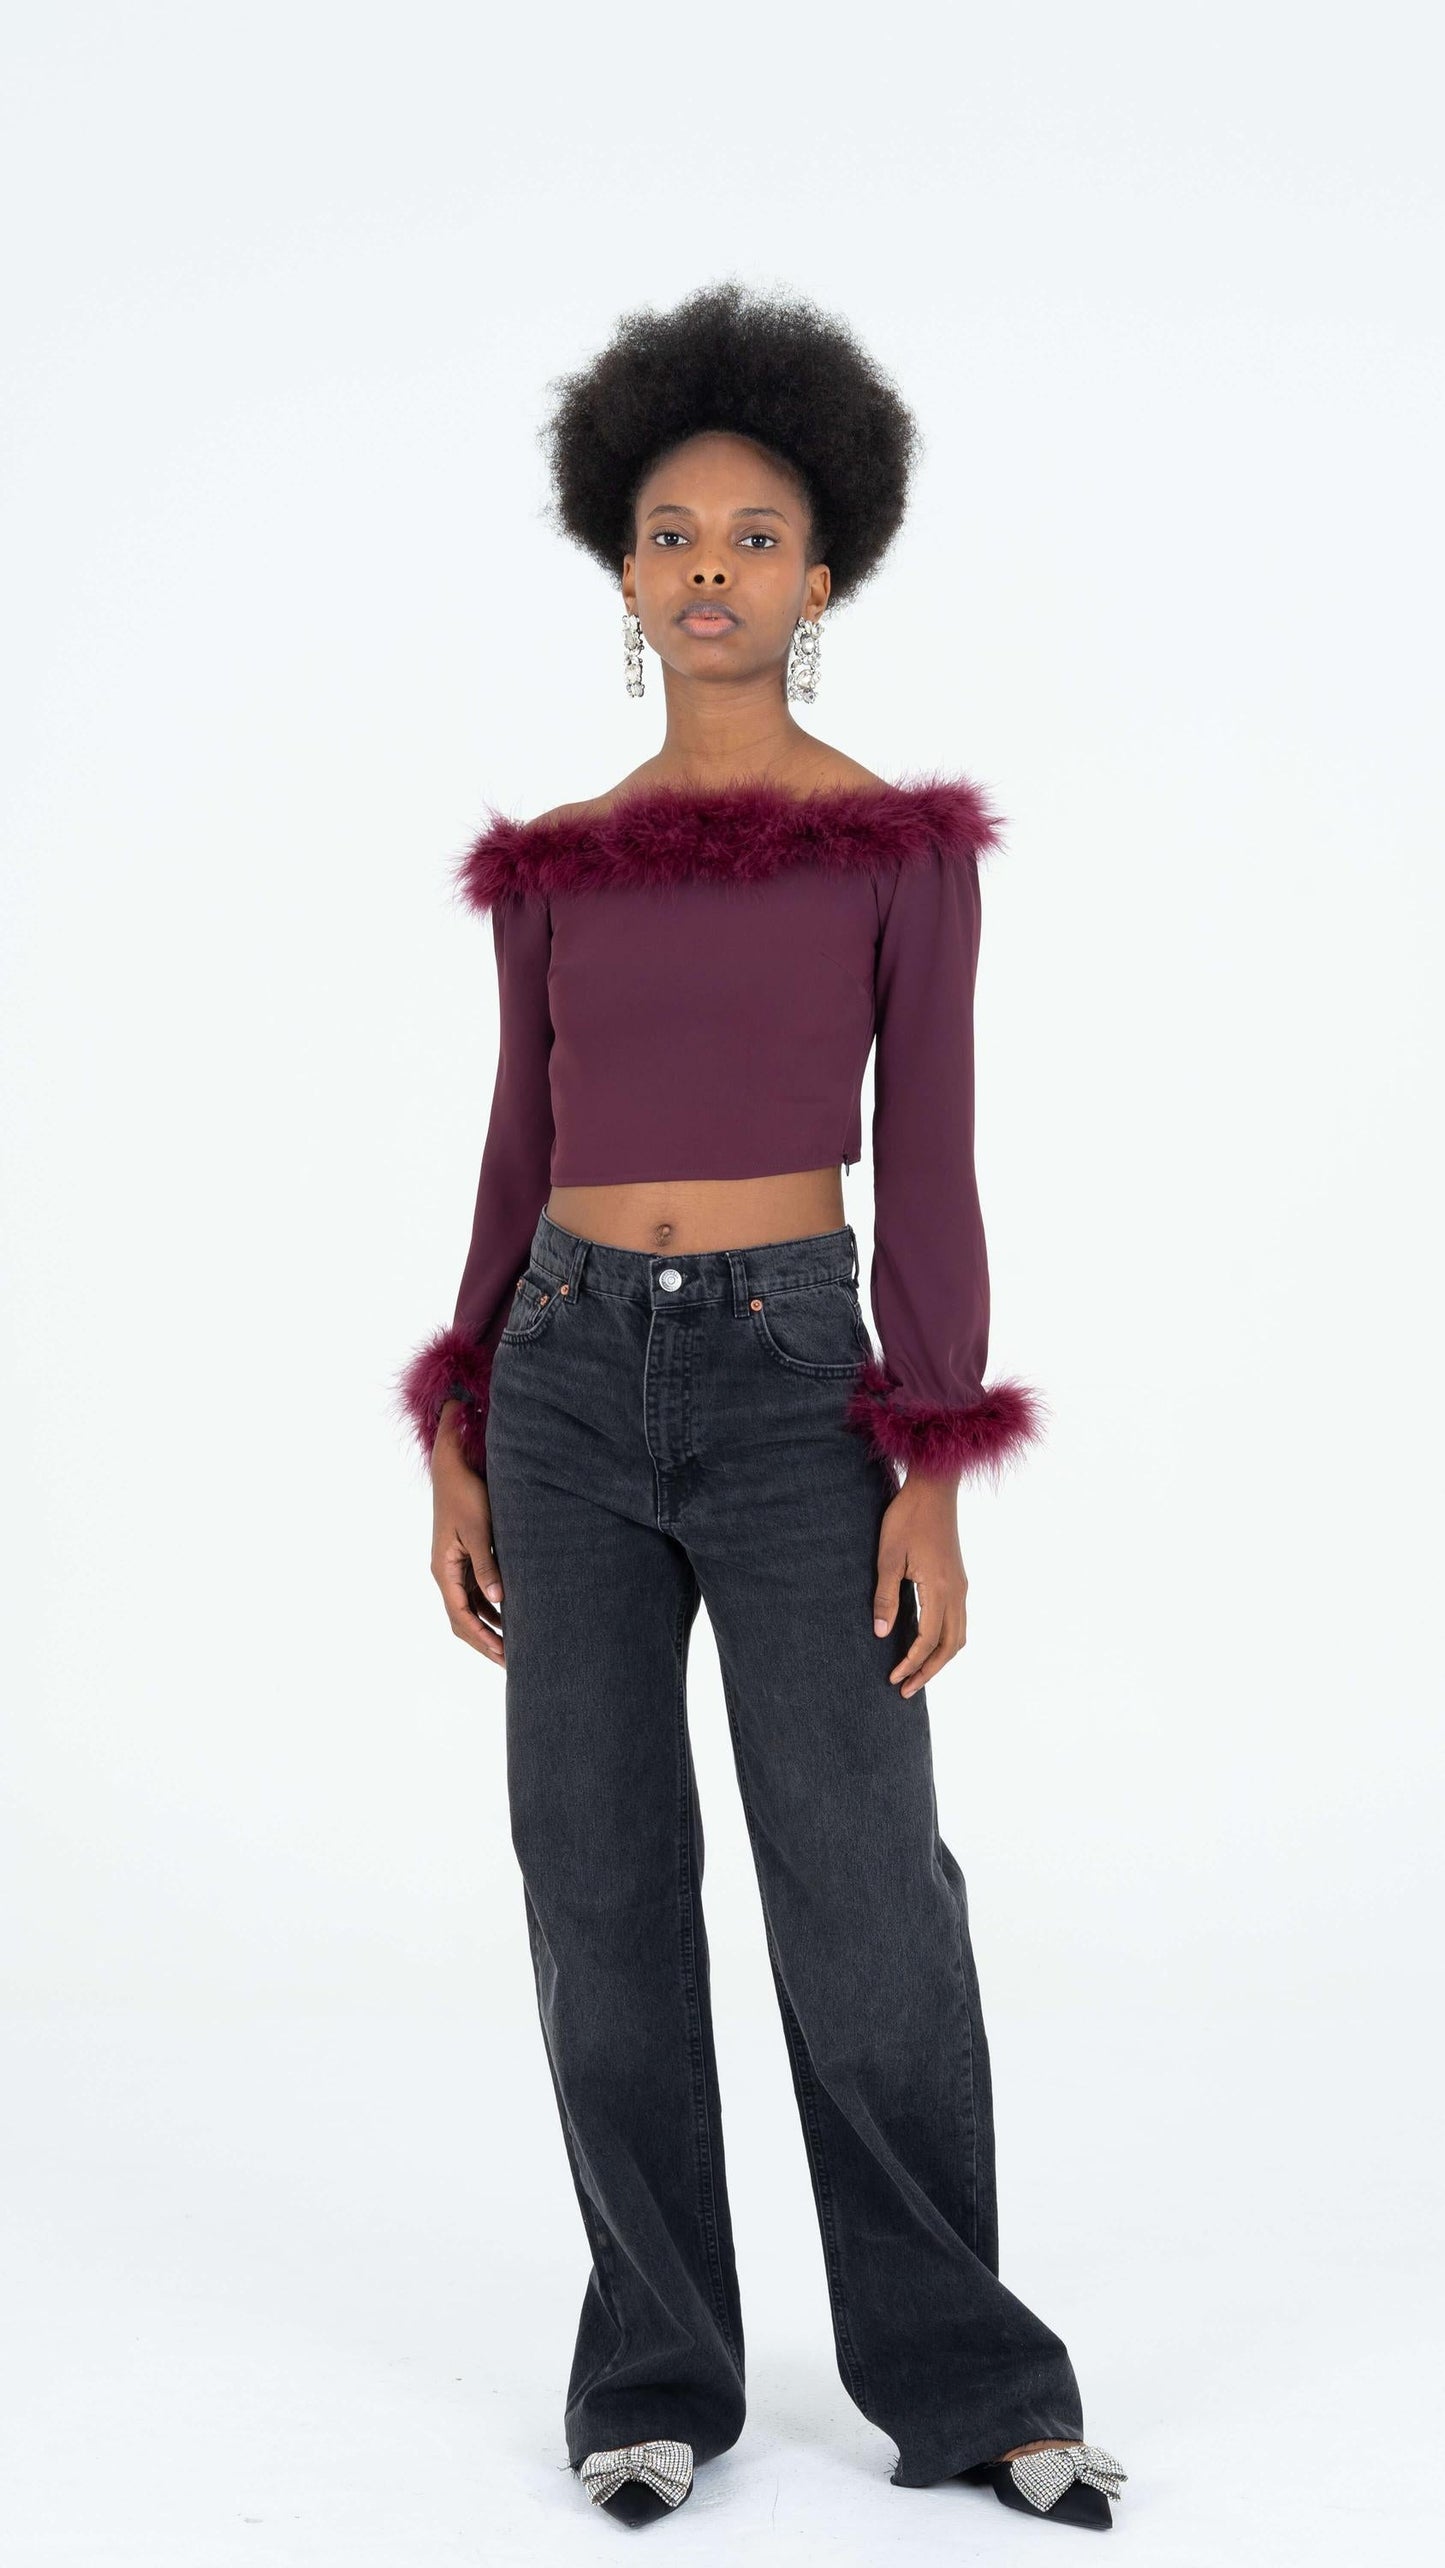 Feather burgundy top